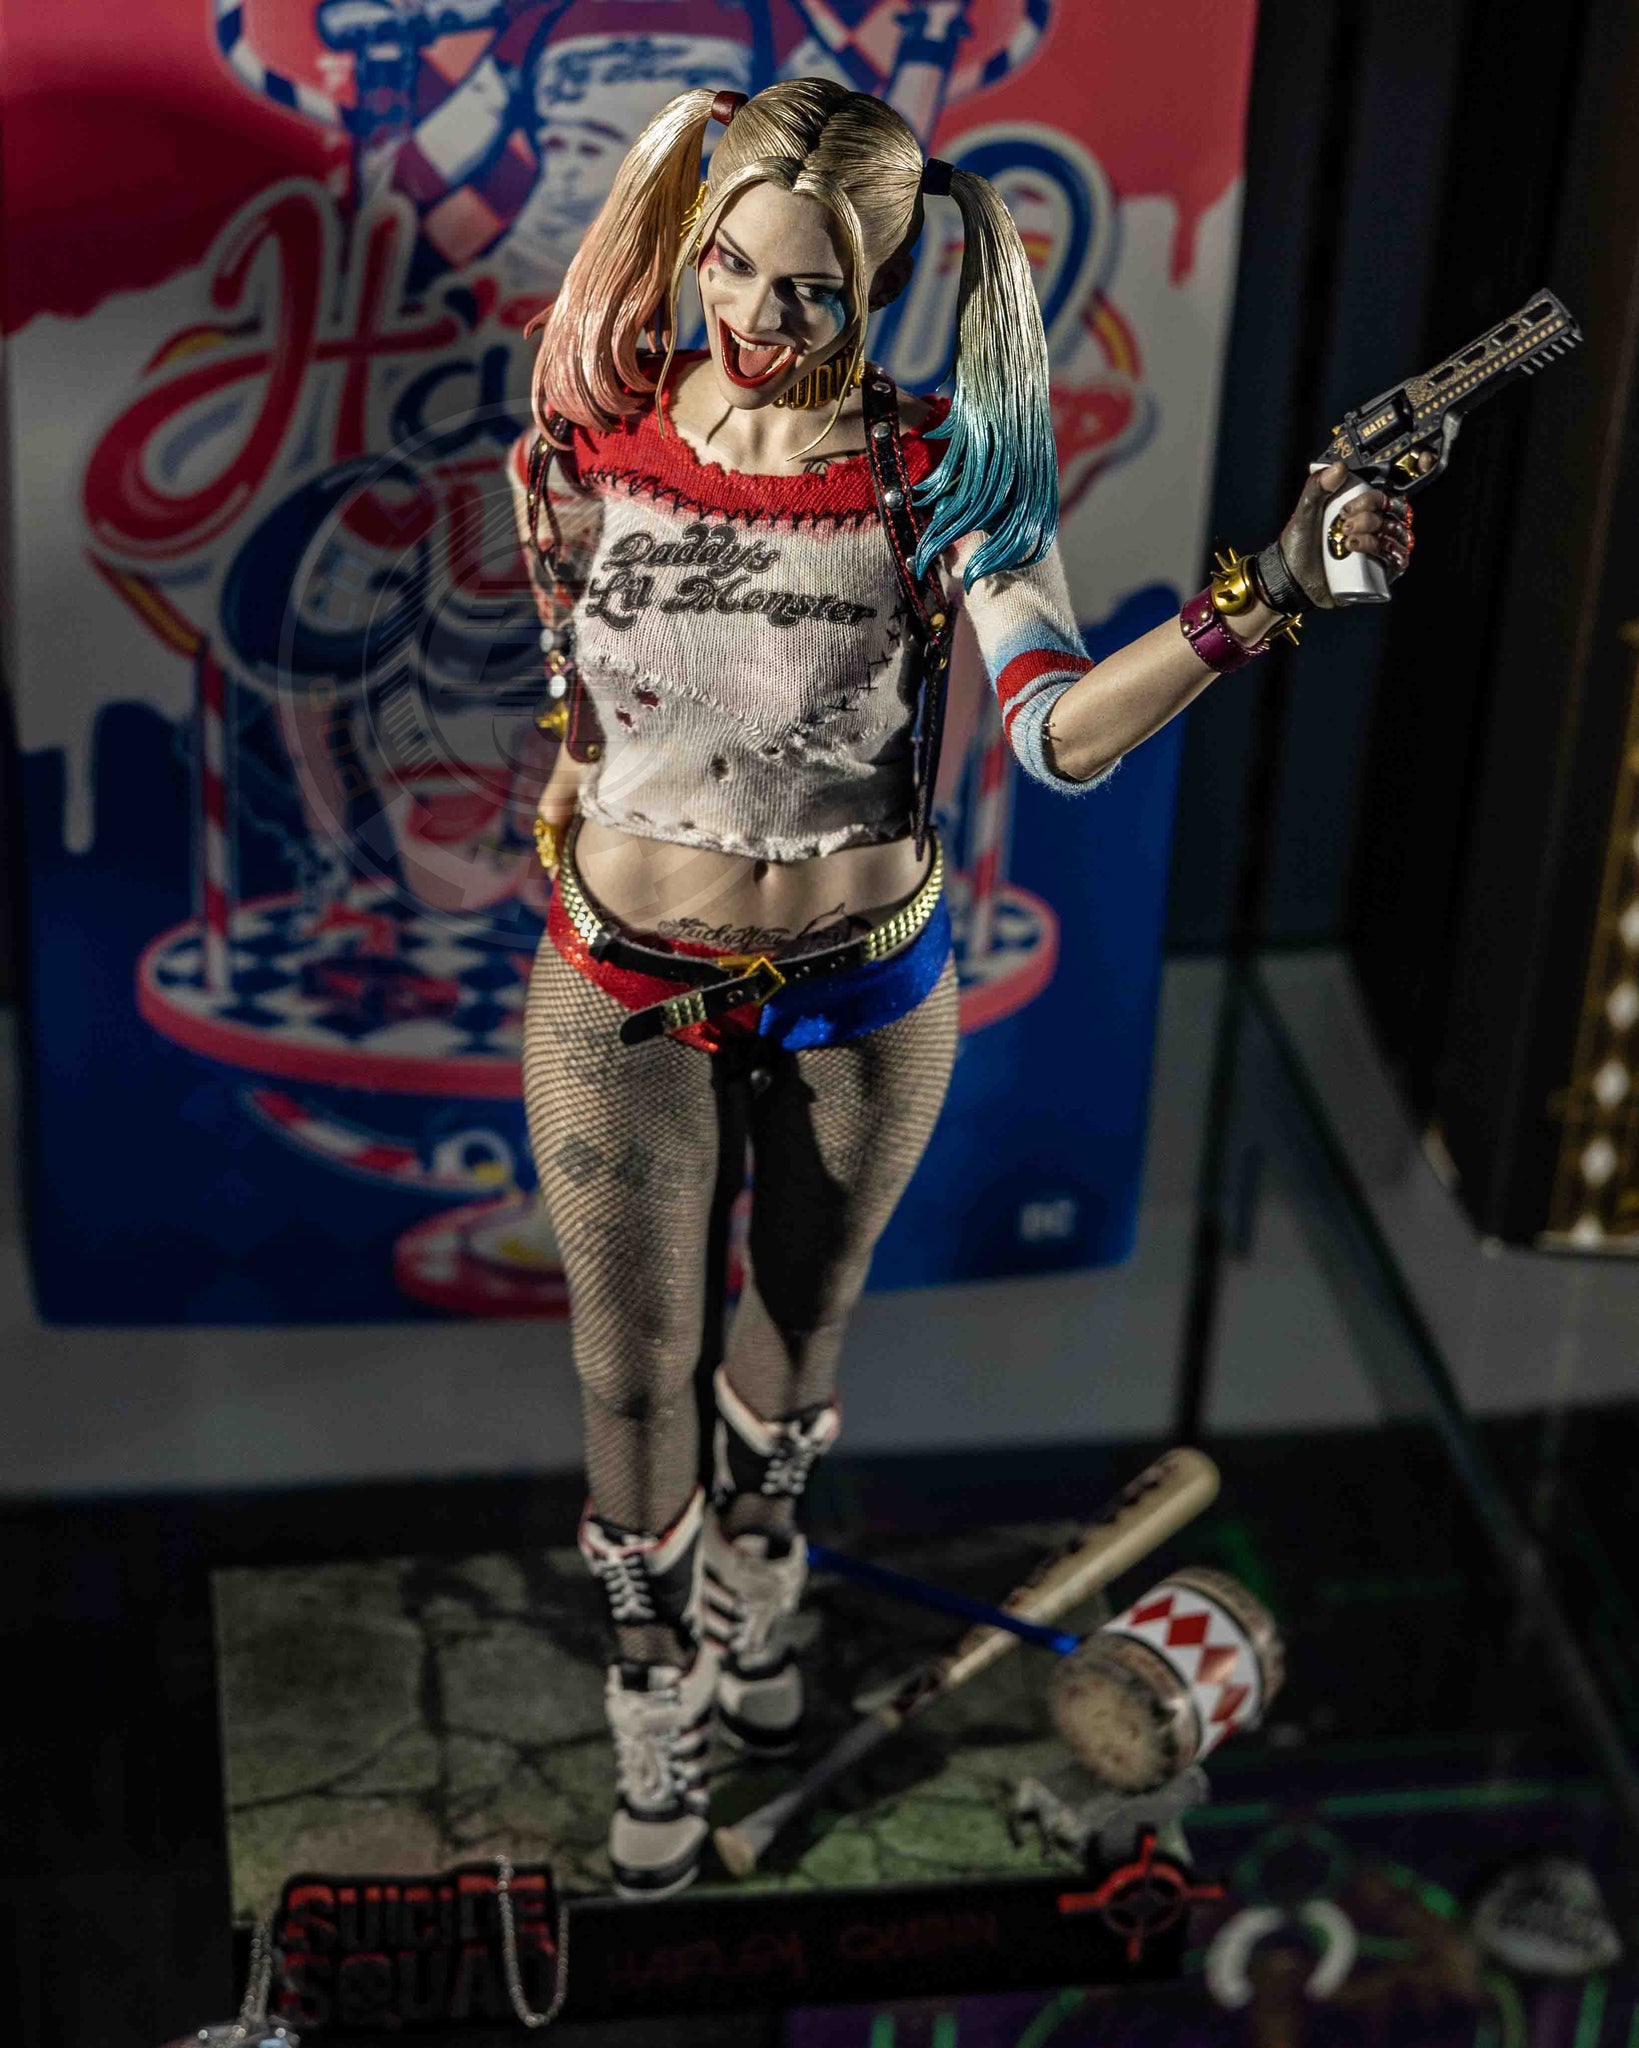 brendon yee recommends Hot Harley Quinn Images